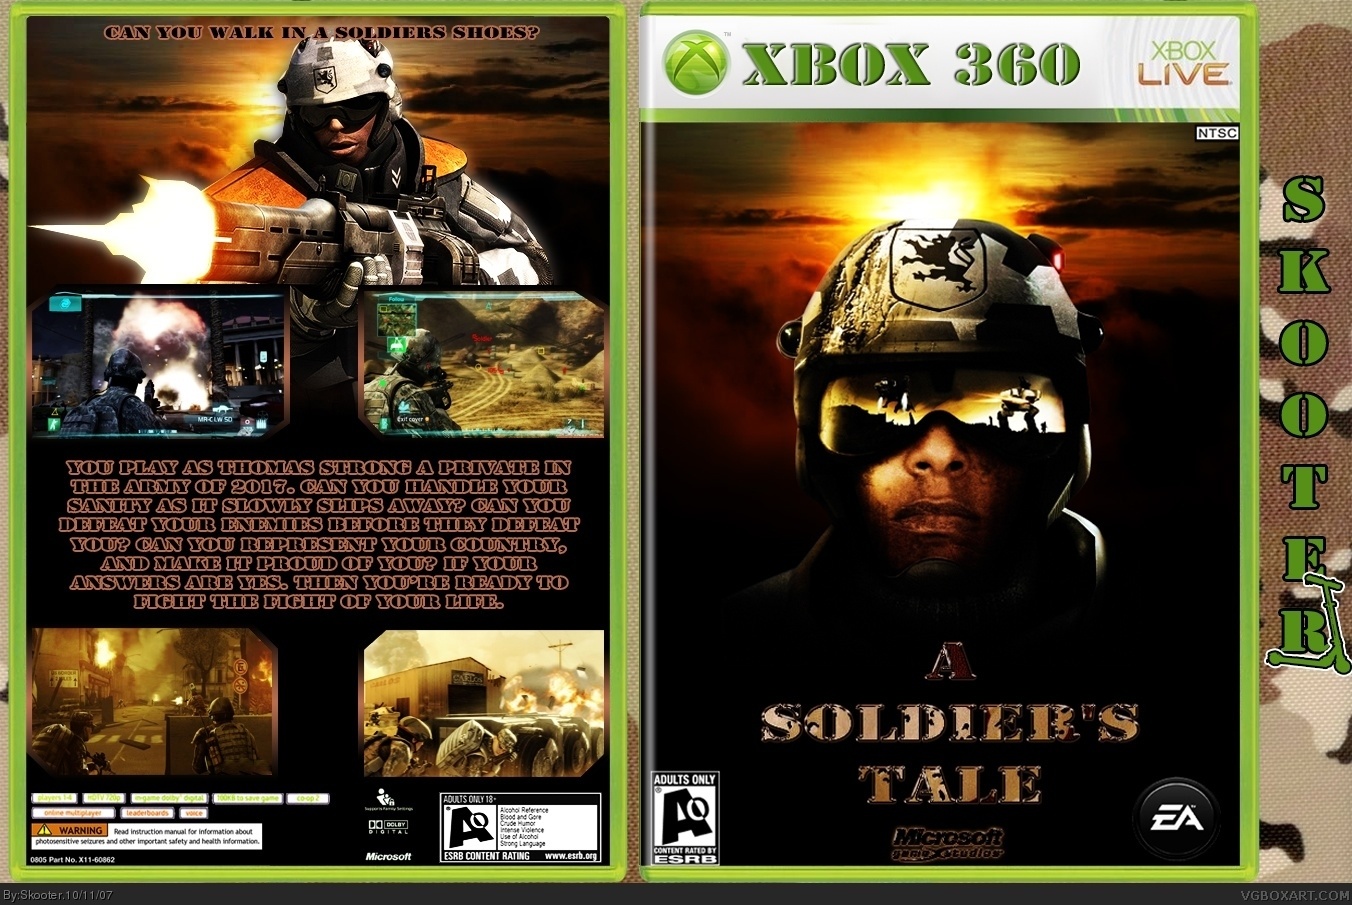 A Soldier's Tale box cover